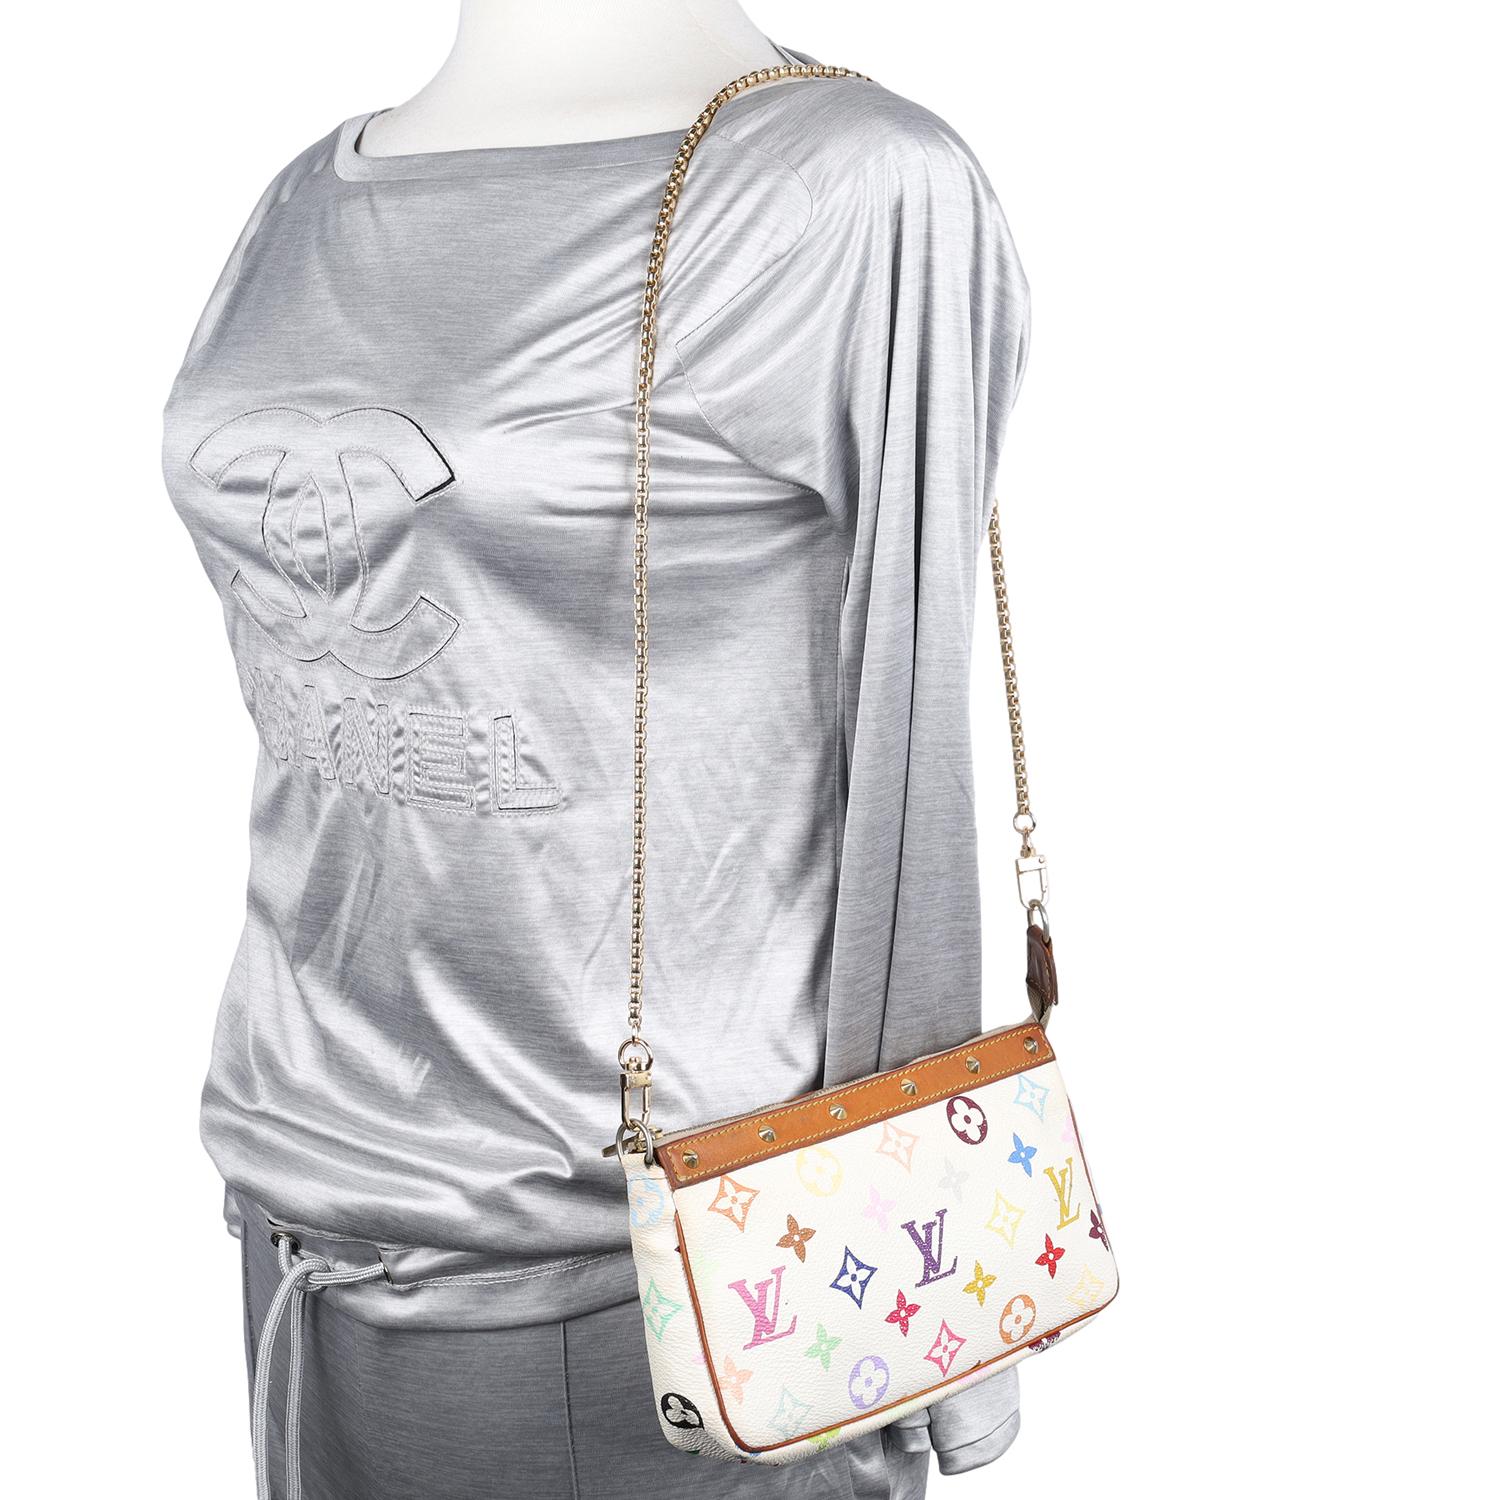 Authentic, pre loved Louis Vuitton Takashi Murakami monogram multicolor pochette cross body bag. Features 33 vibrant colors on white coated canvas with gold studs, zipper top closure with burgundy microfiber interior. Pochette with non-LV gold cross